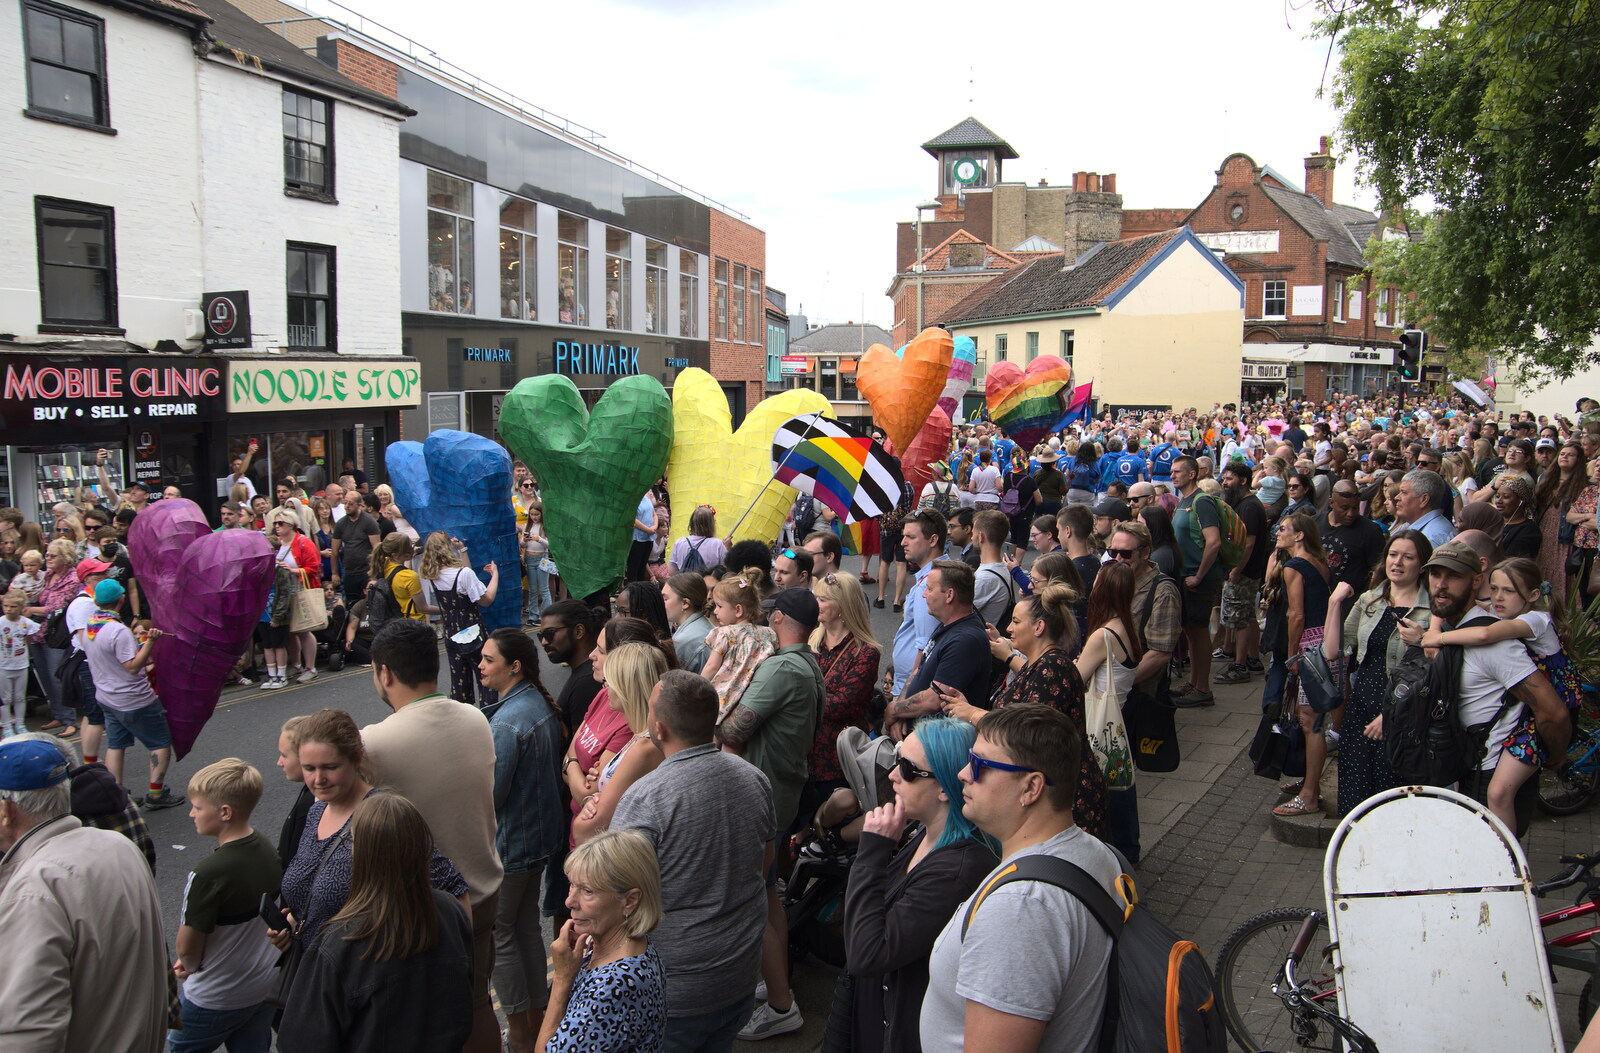 Samba carries on up to Castle Meadow from The Lord Mayor's Procession, Norwich, Norfolk - 2nd July 2022